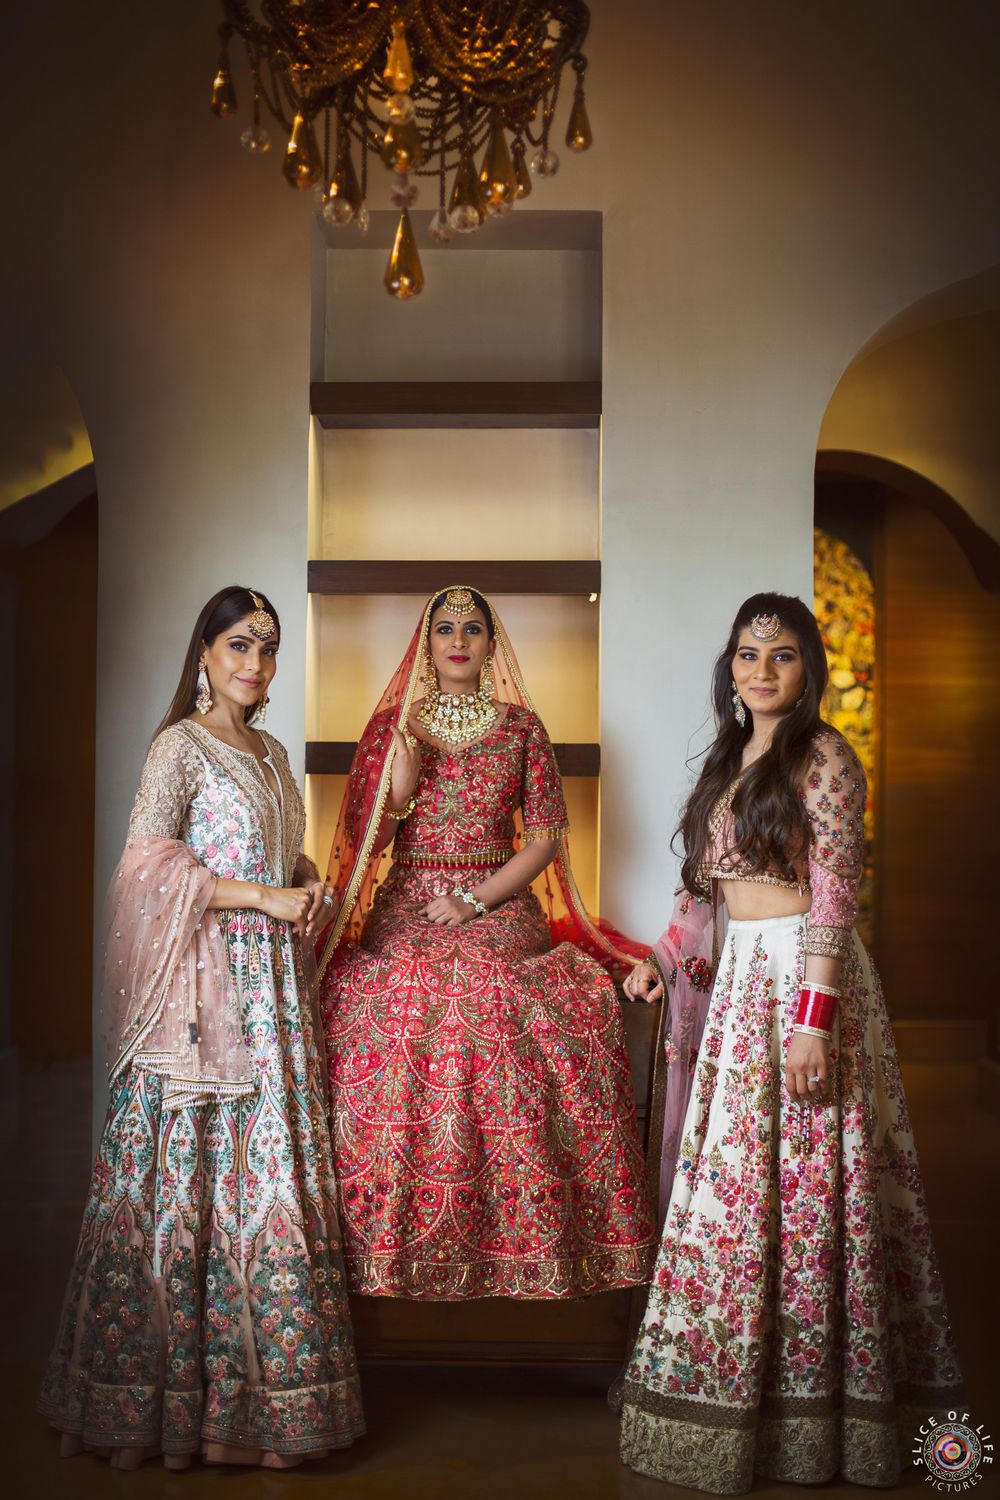 Photo of A bride in red lehenga poses with her bridesmaids on the wedding day